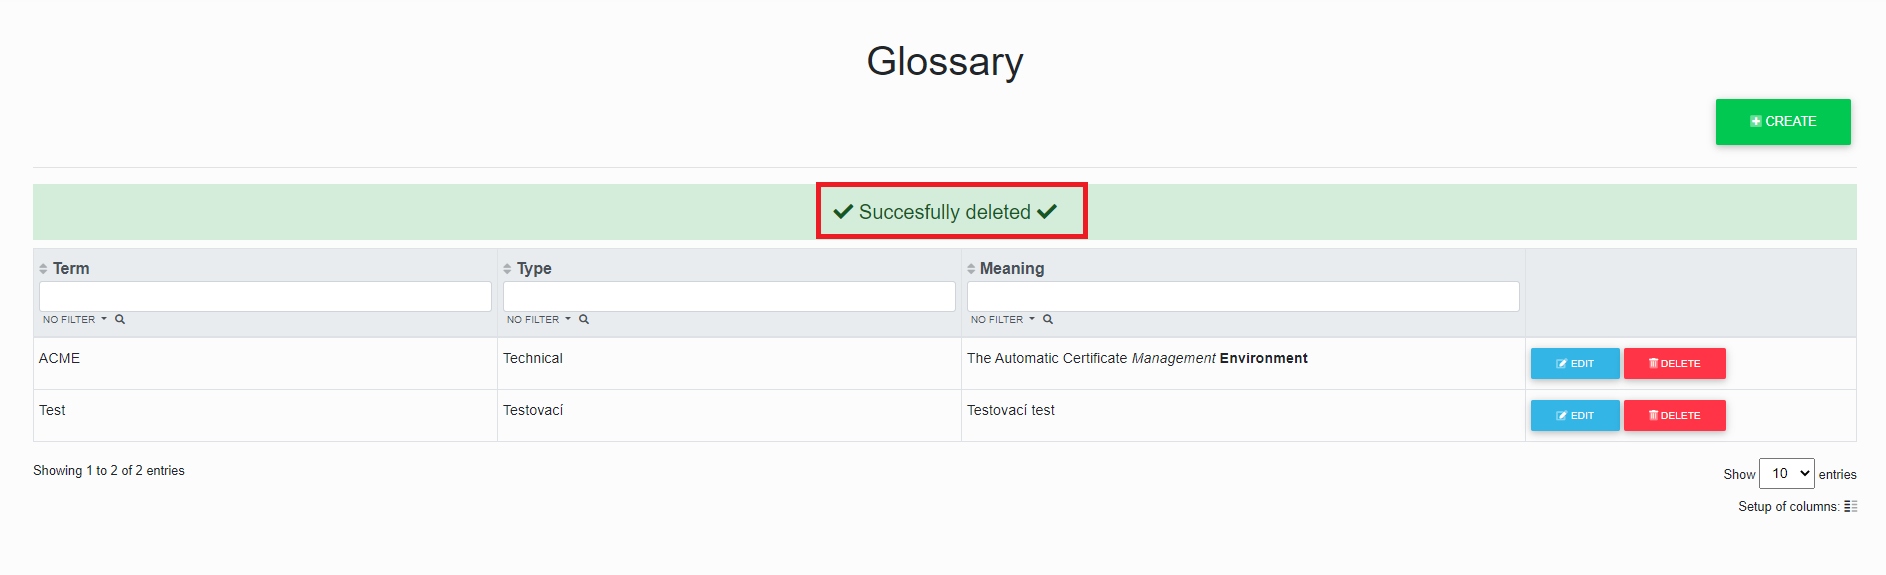 delete glossary succesfullly.png